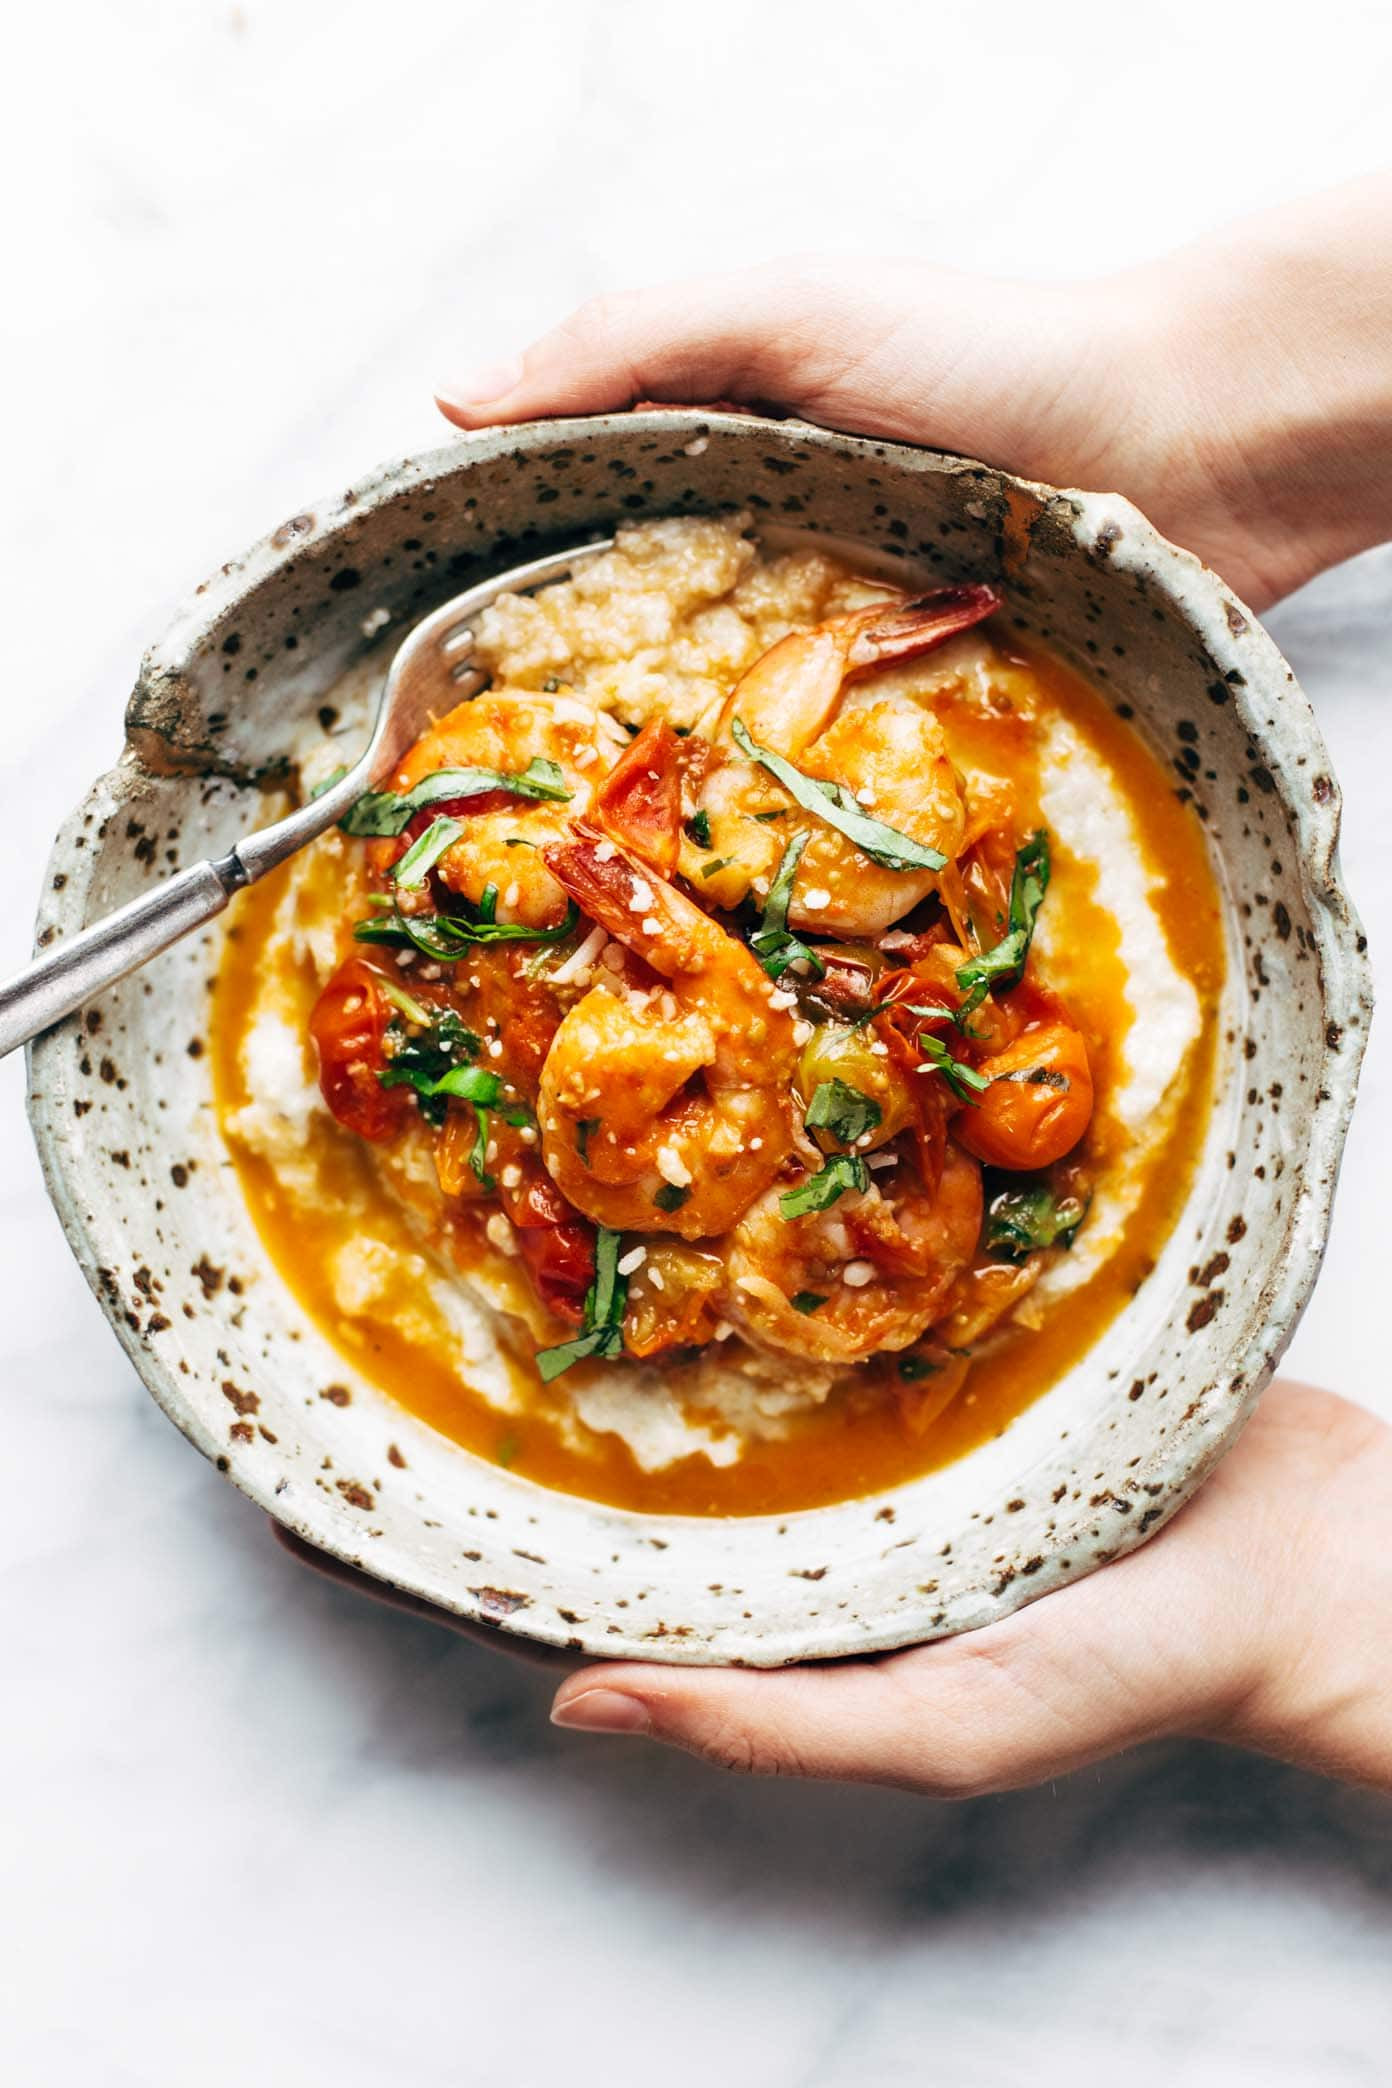 Recipes For Shrimp And Grits
 Garlic Basil Shrimp and Grits Recipe Pinch of Yum